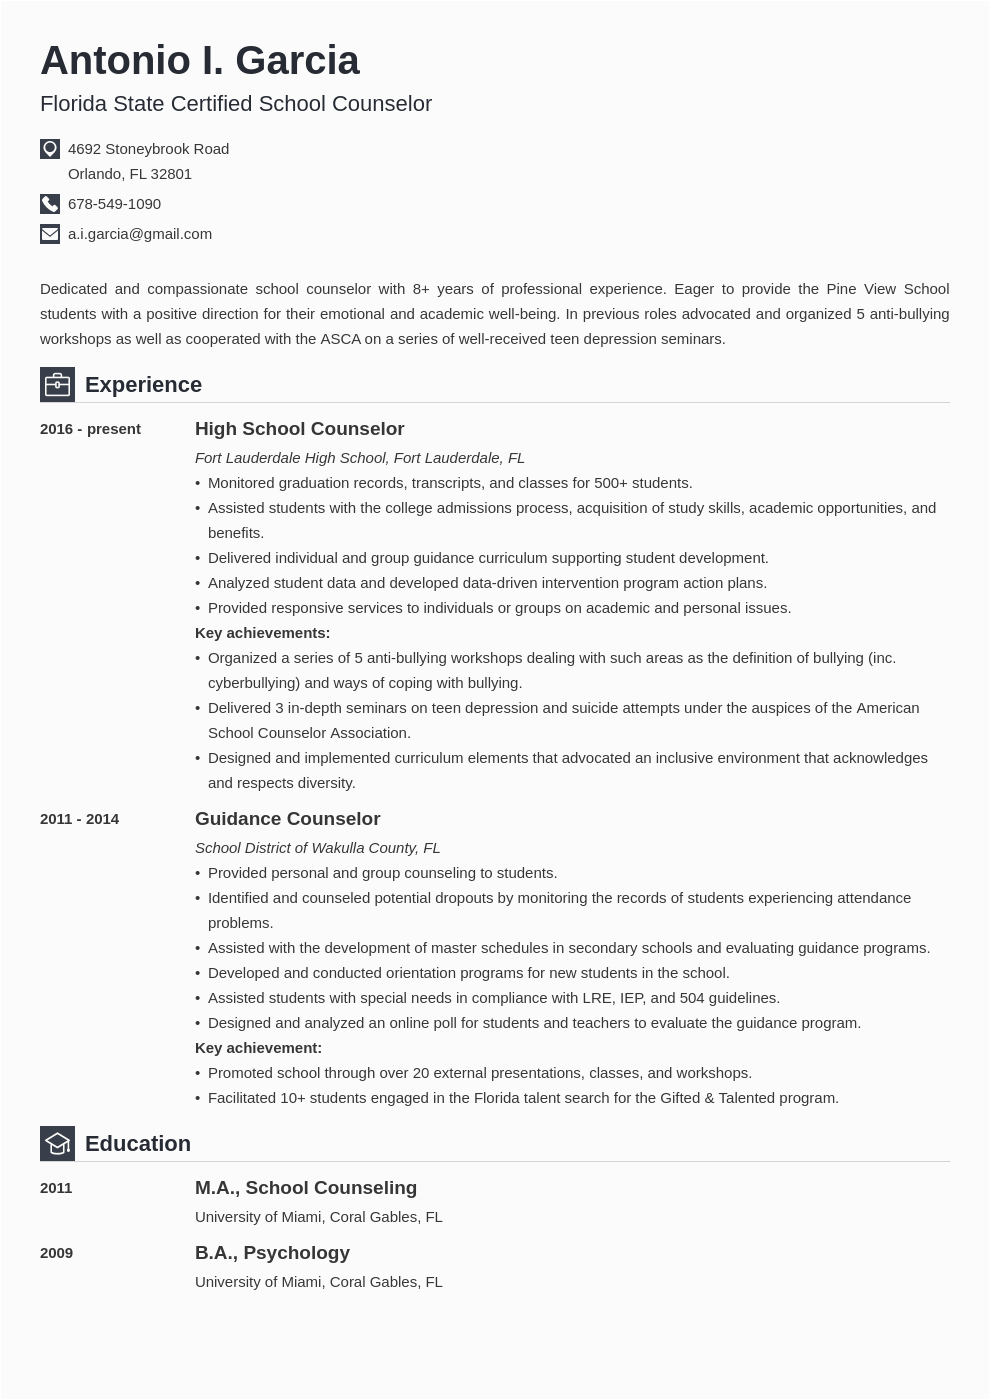 Sample Resume for School Counselor Position School Counselor Resume Sample Job Description Skills